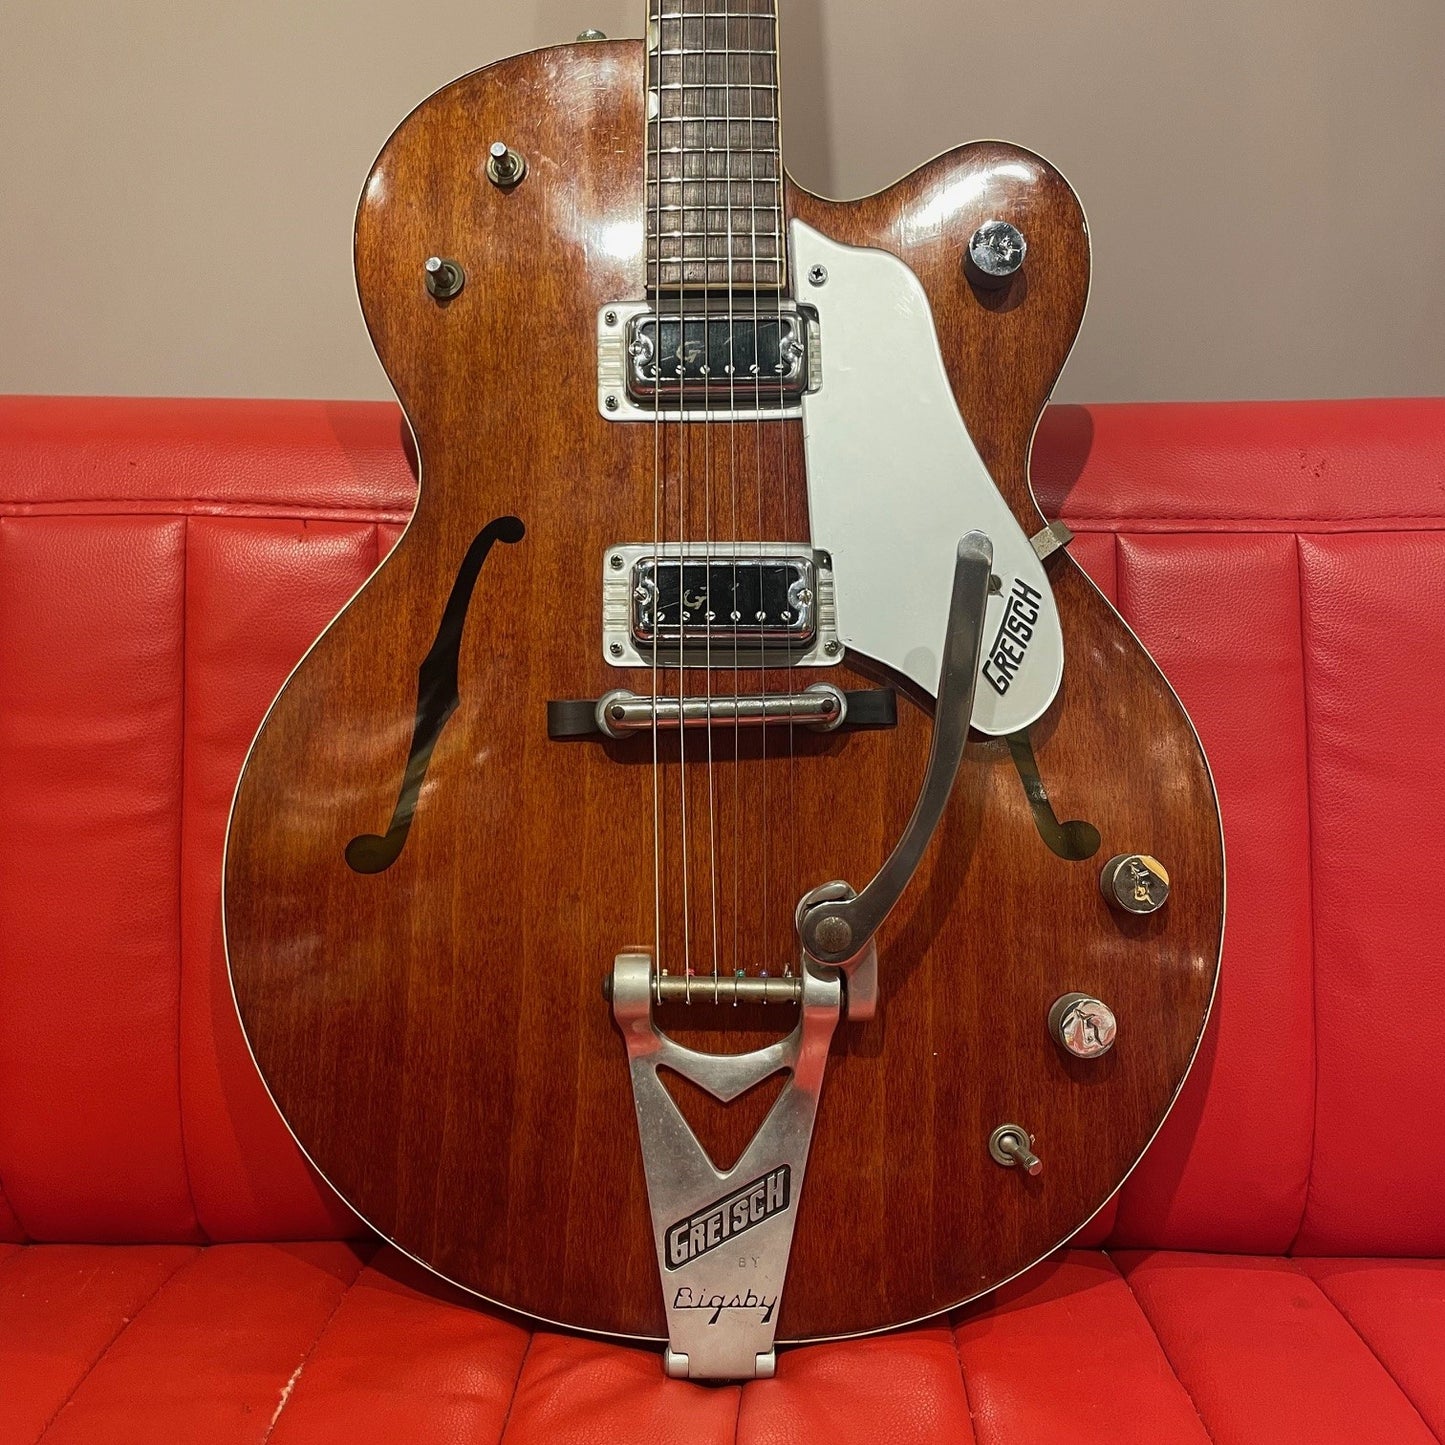 [SN X7721] USED Gretsch / 1962 #6119 Chet Atkins Tennessean [04]